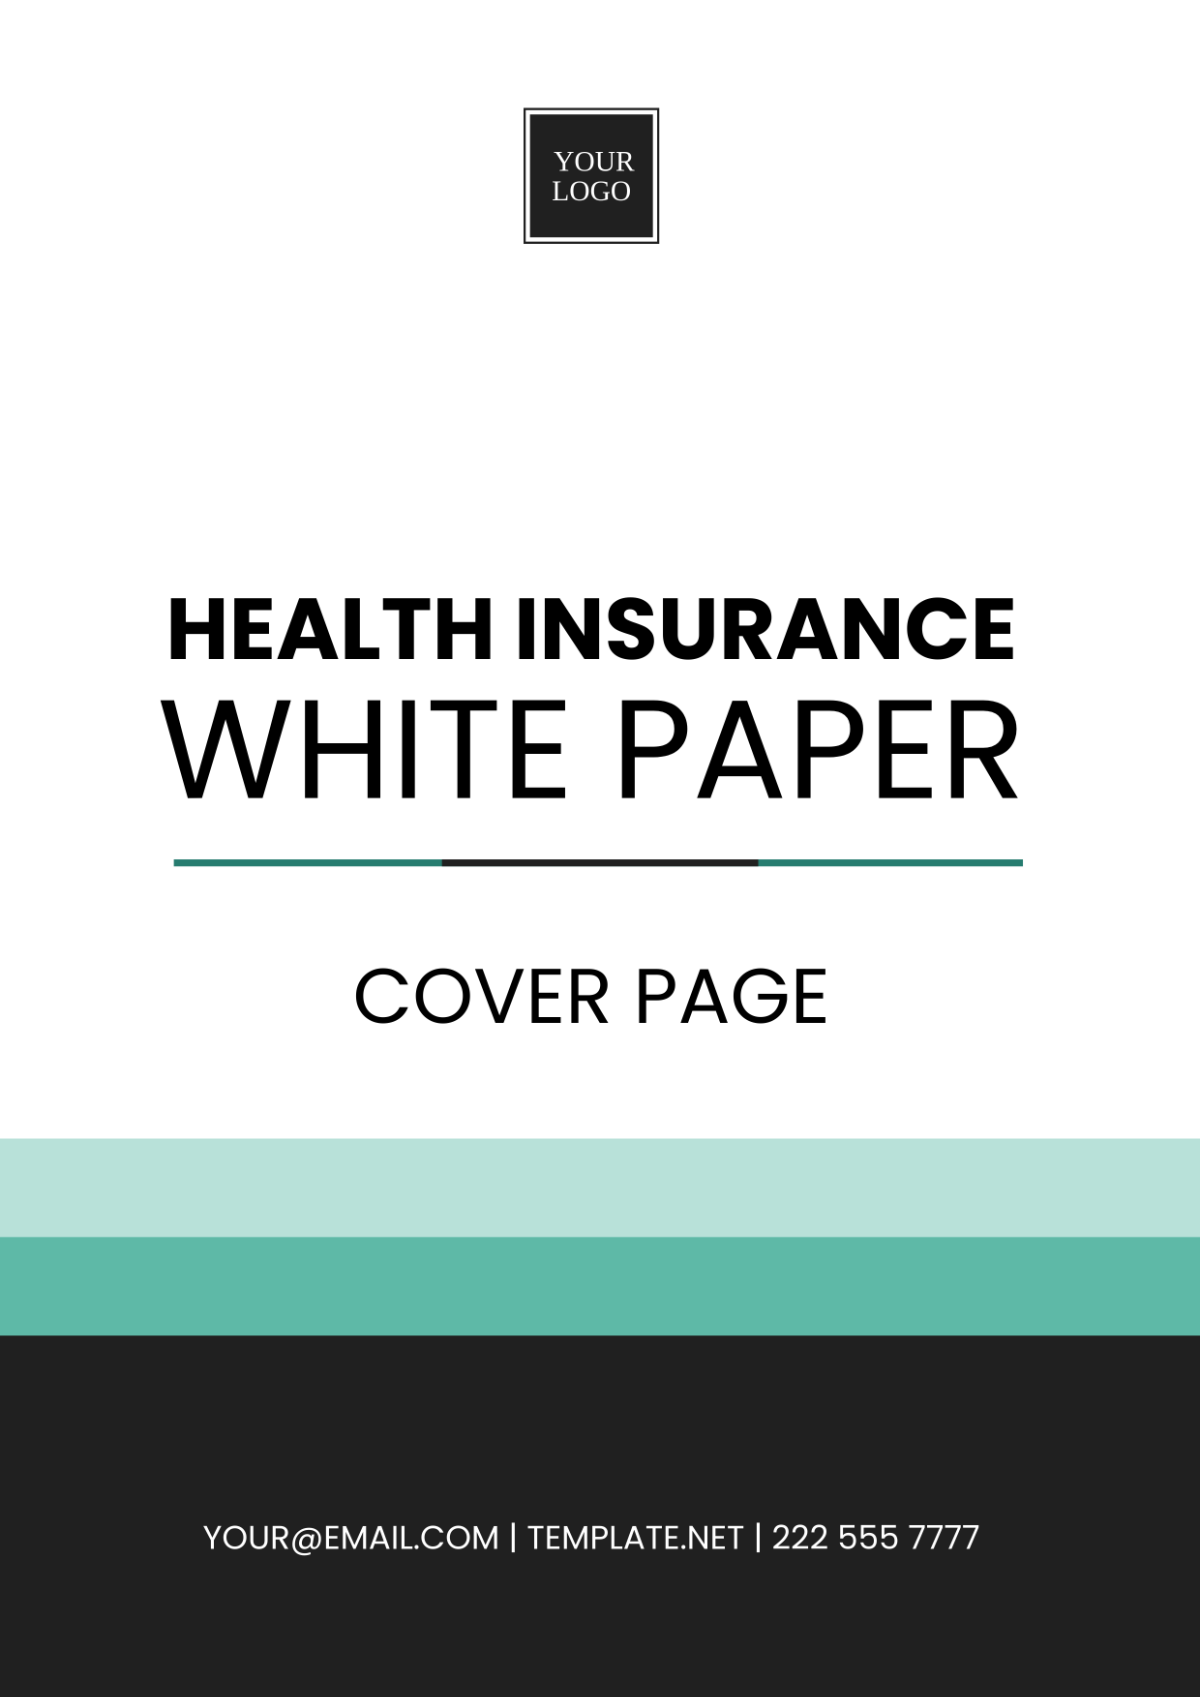 Health Insurance White Paper Cover Page Template